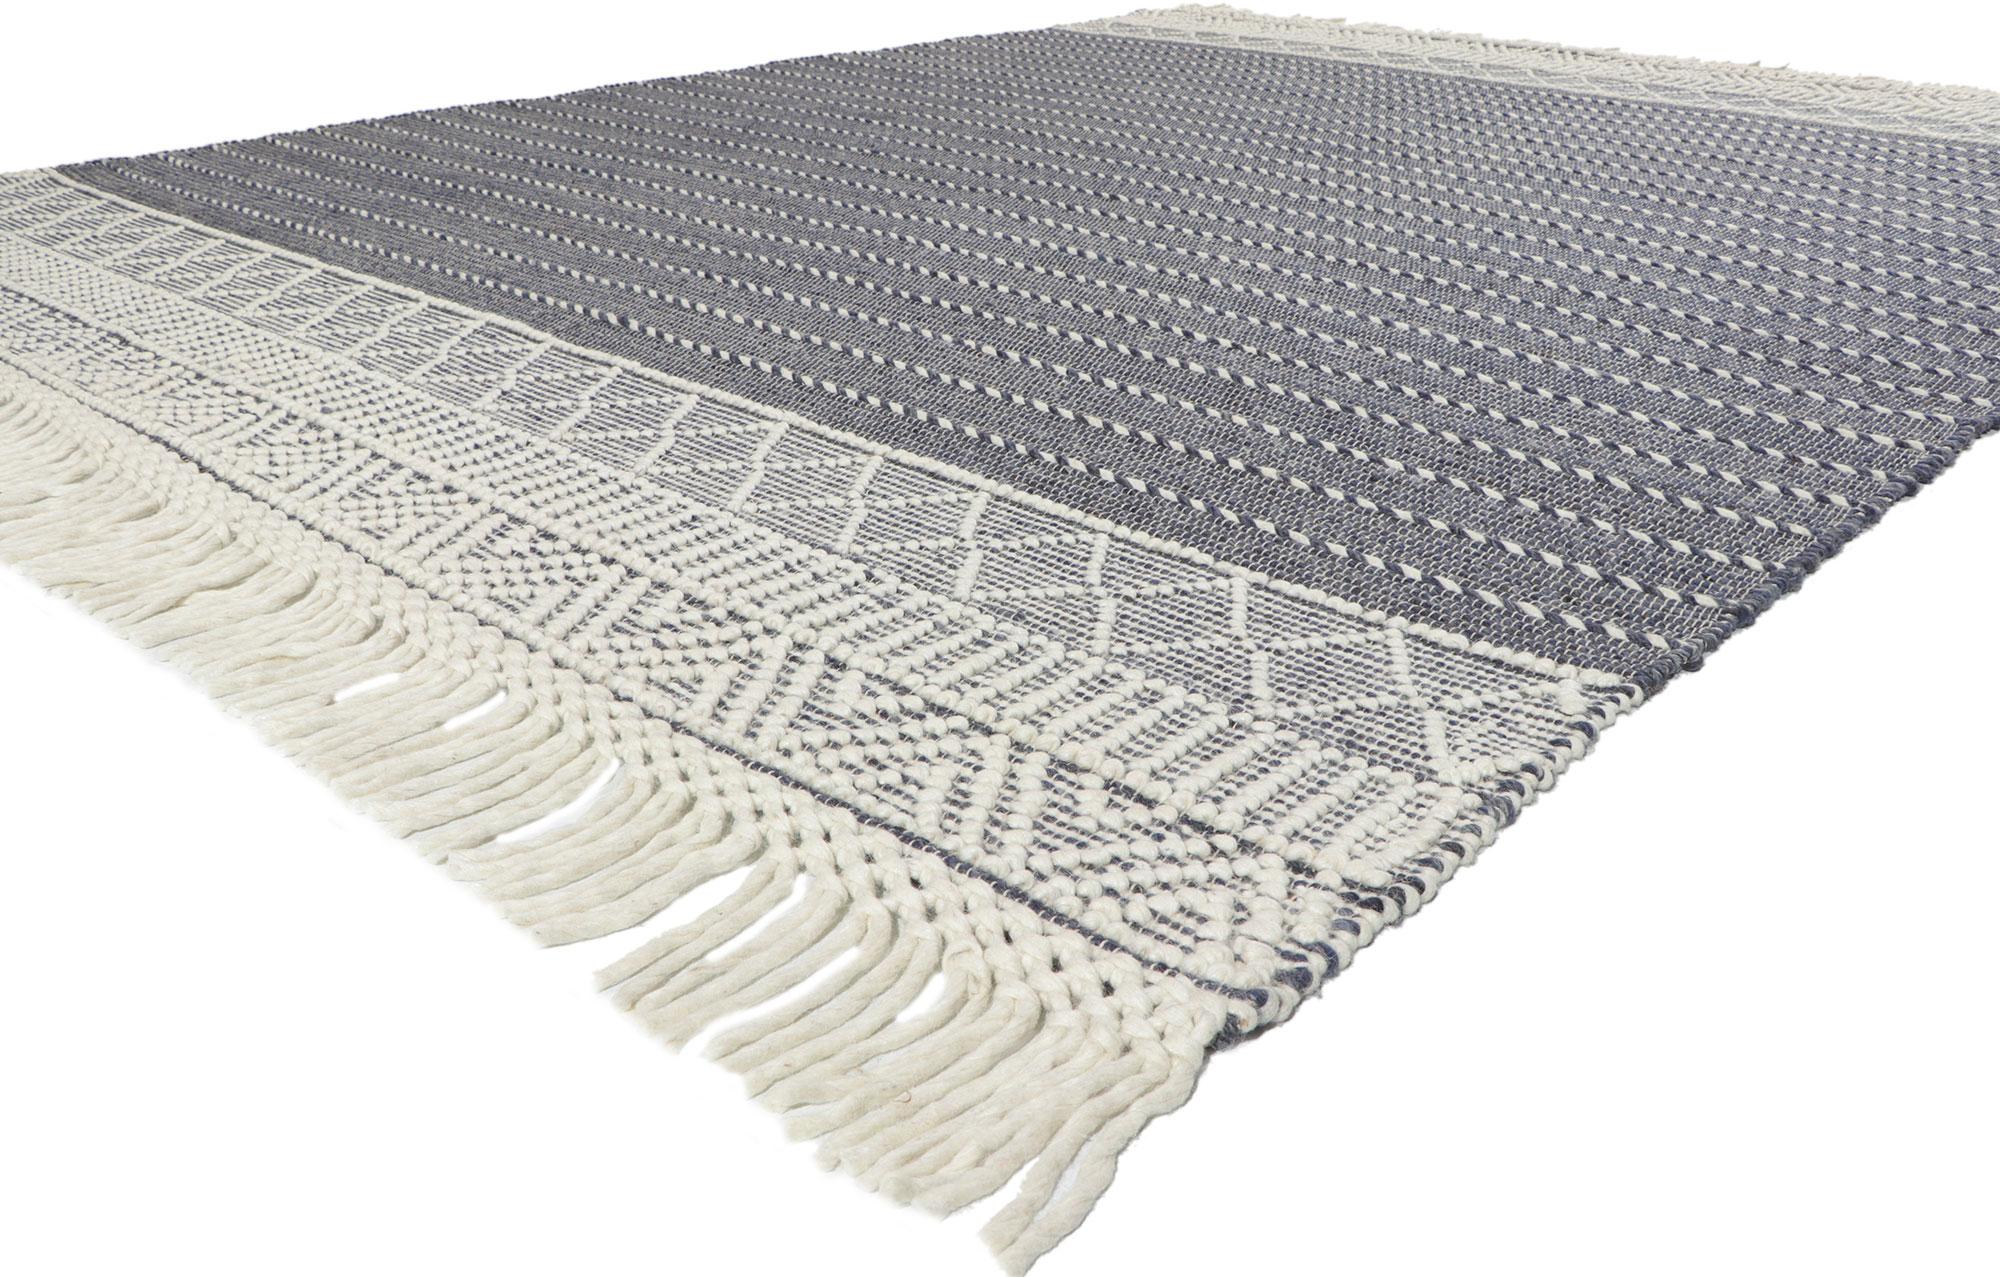 30899 New Handwoven Textured Jute Rug, 09'05 x 12'02. Emanating coastal style with incredible detail and texture, this handwoven jute rug is a captivating vision of woven beauty. The genteel design and charming colorway woven into this piece work